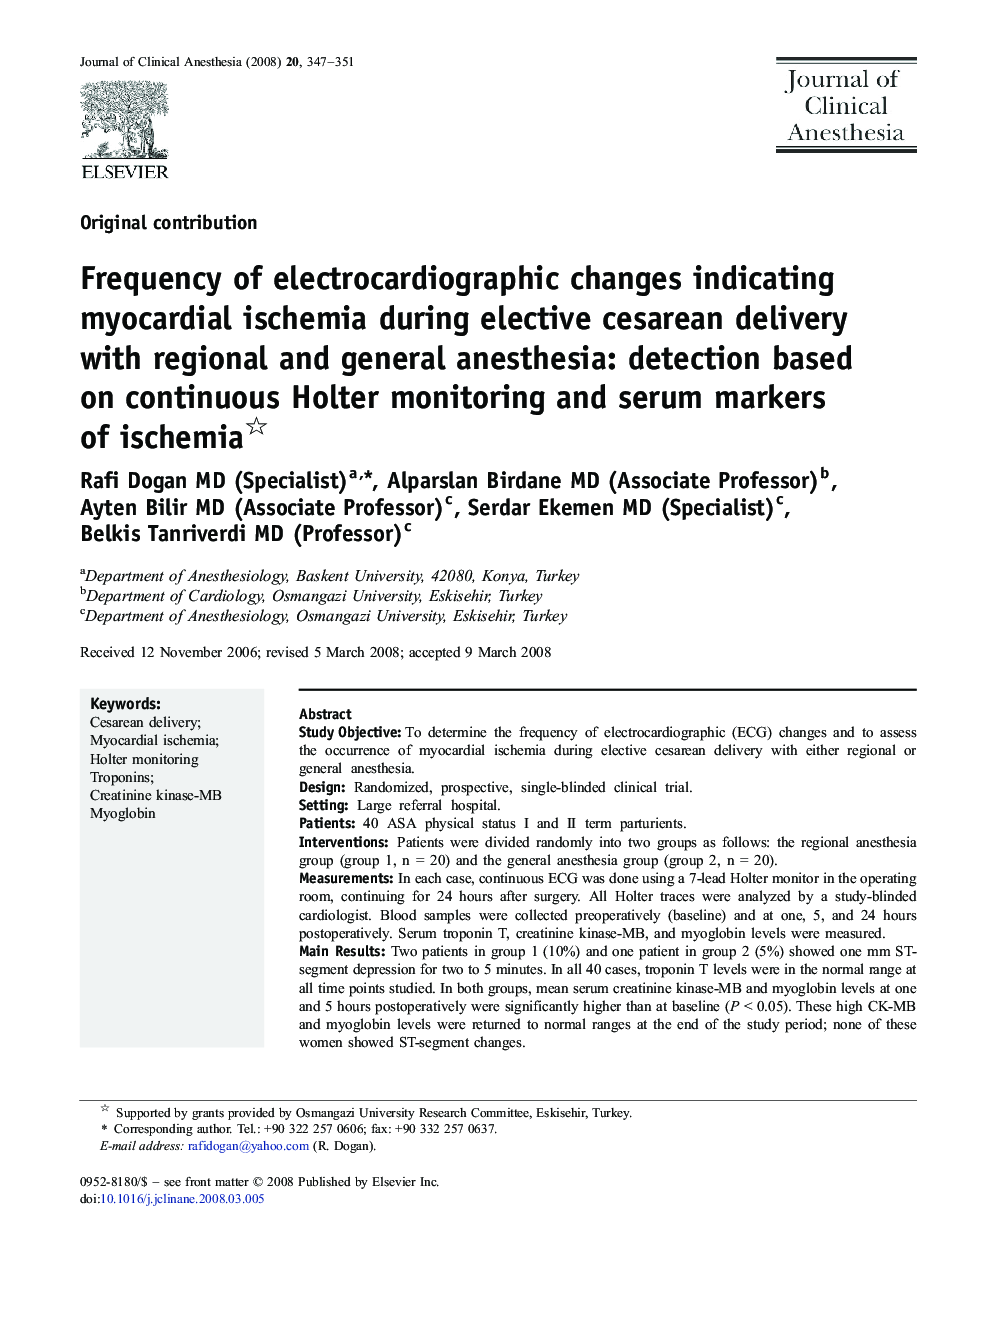 Frequency of electrocardiographic changes indicating myocardial ischemia during elective cesarean delivery with regional and general anesthesia: detection based on continuous Holter monitoring and serum markers of ischemia 